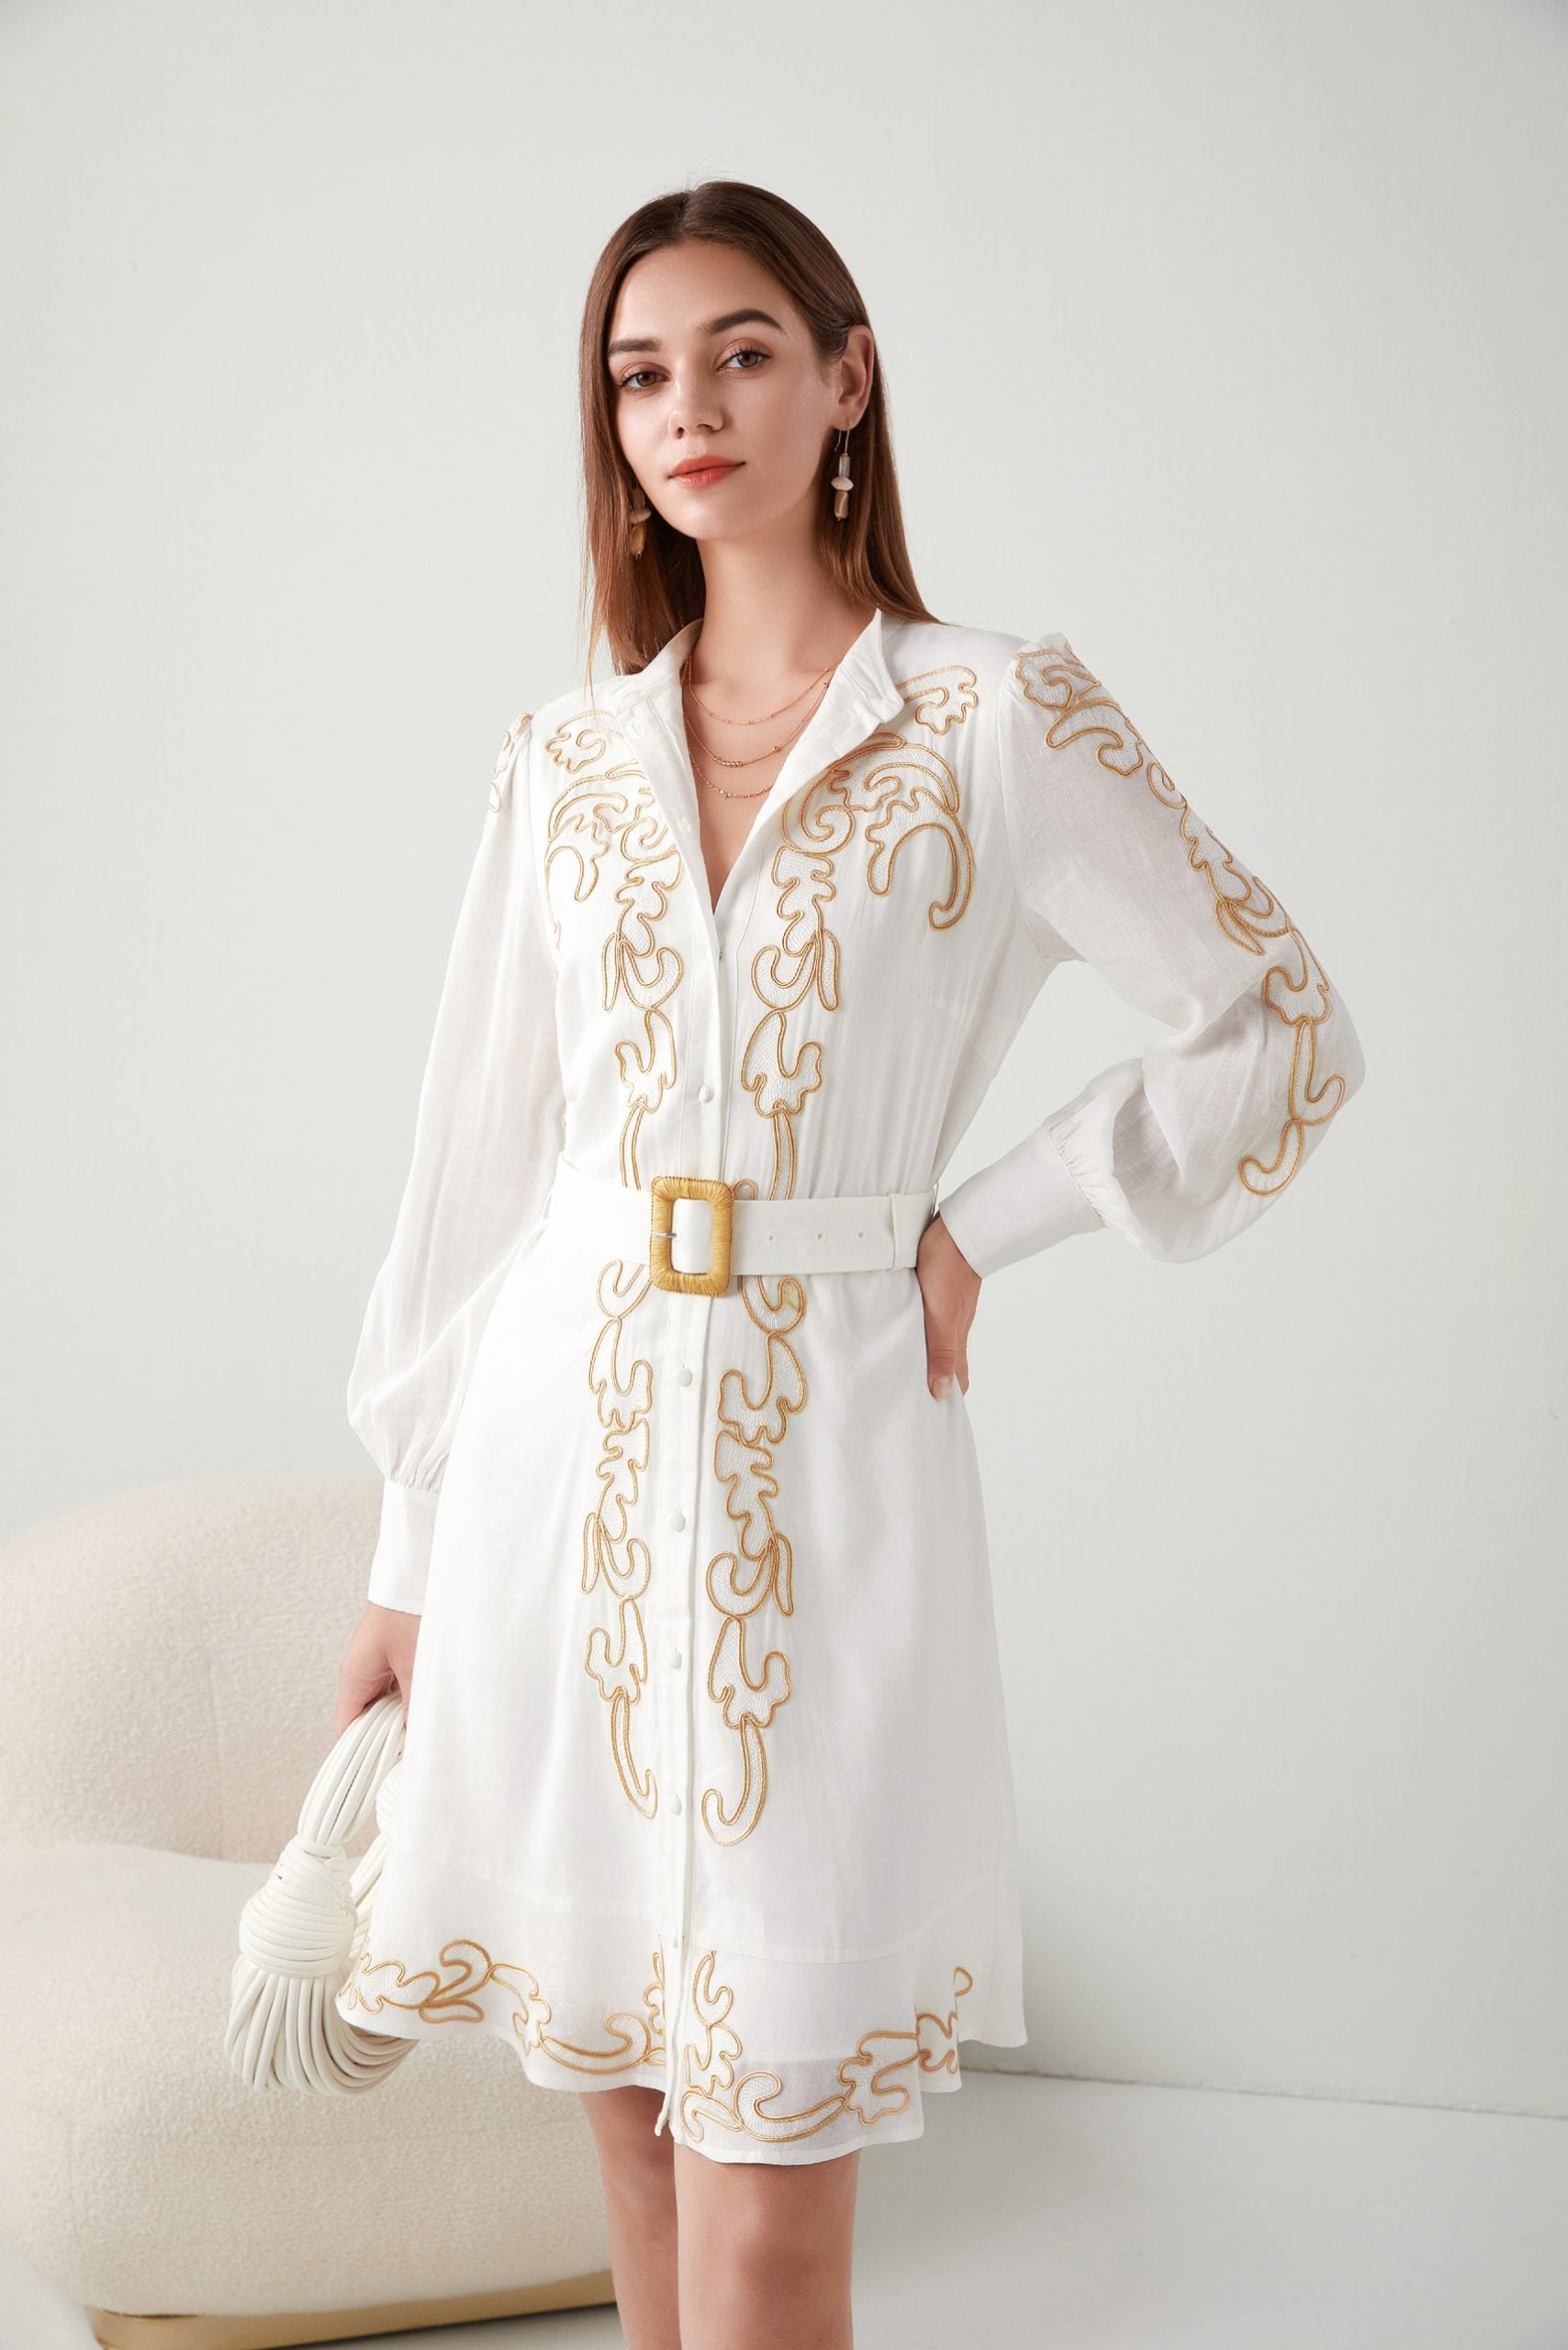 "Elevate elegance: Short white dress with intricate embroidery. Shop now for timeless style!